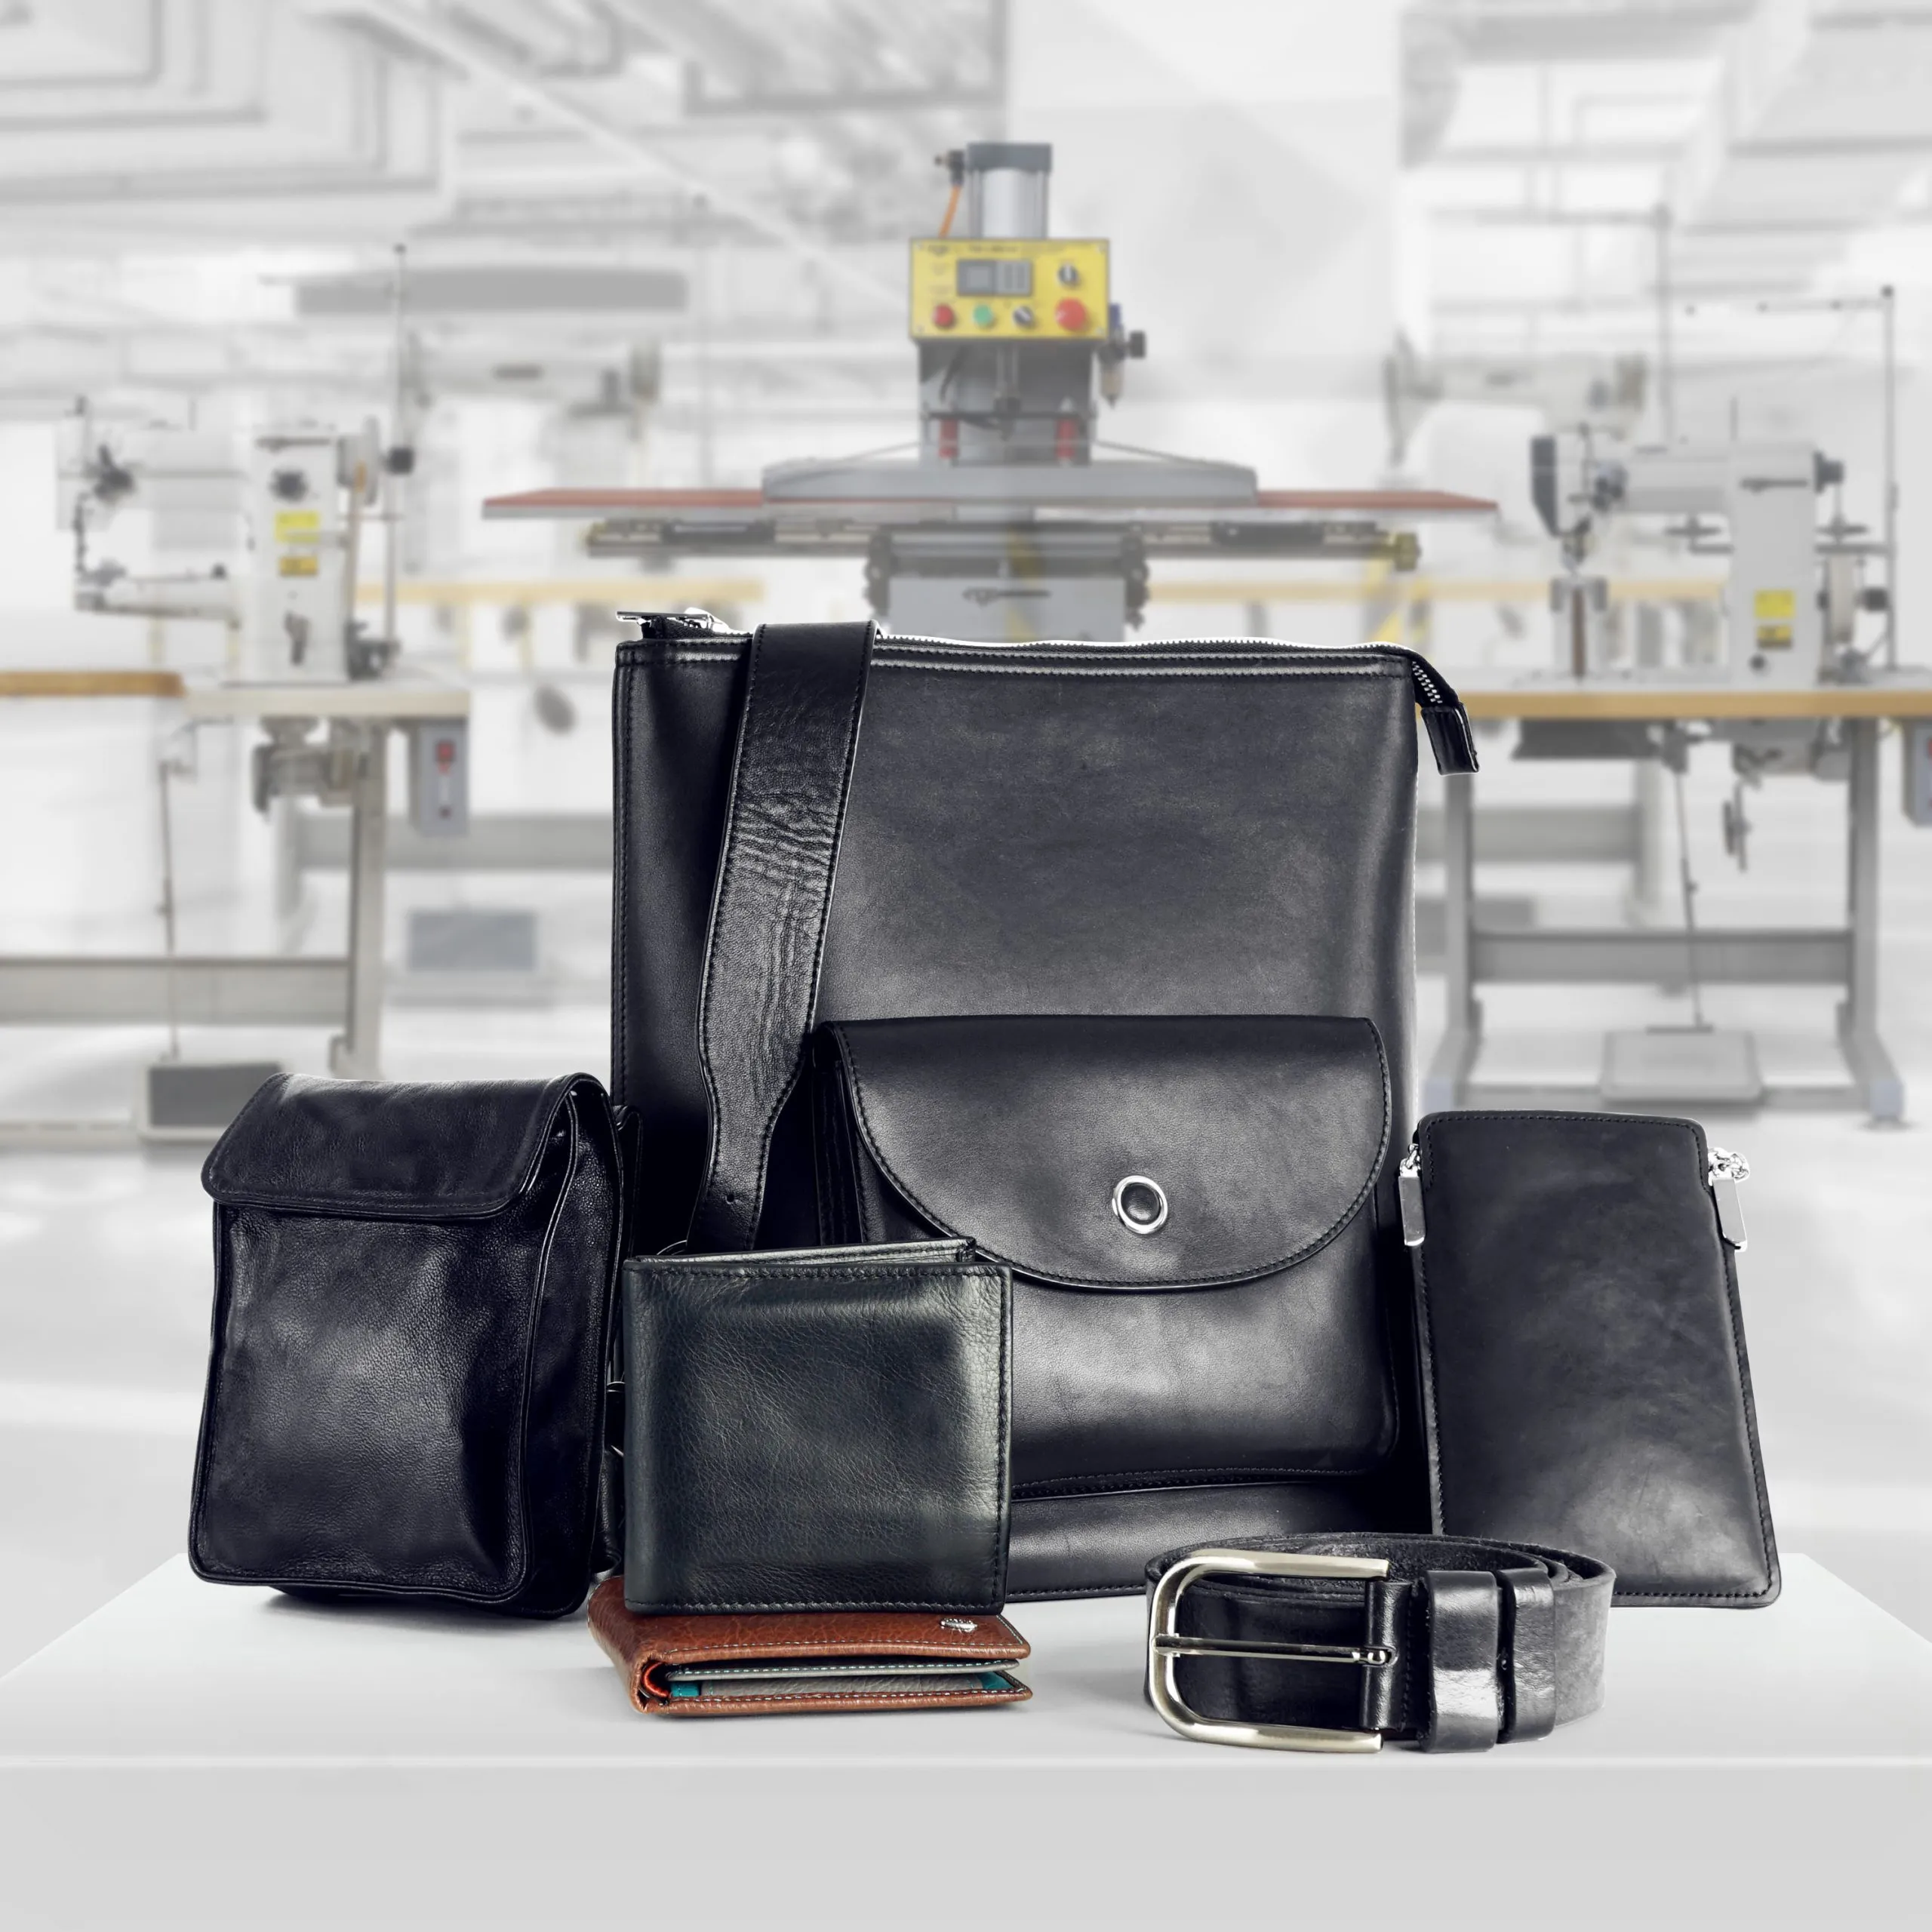 Leather goods manufacturing equipment